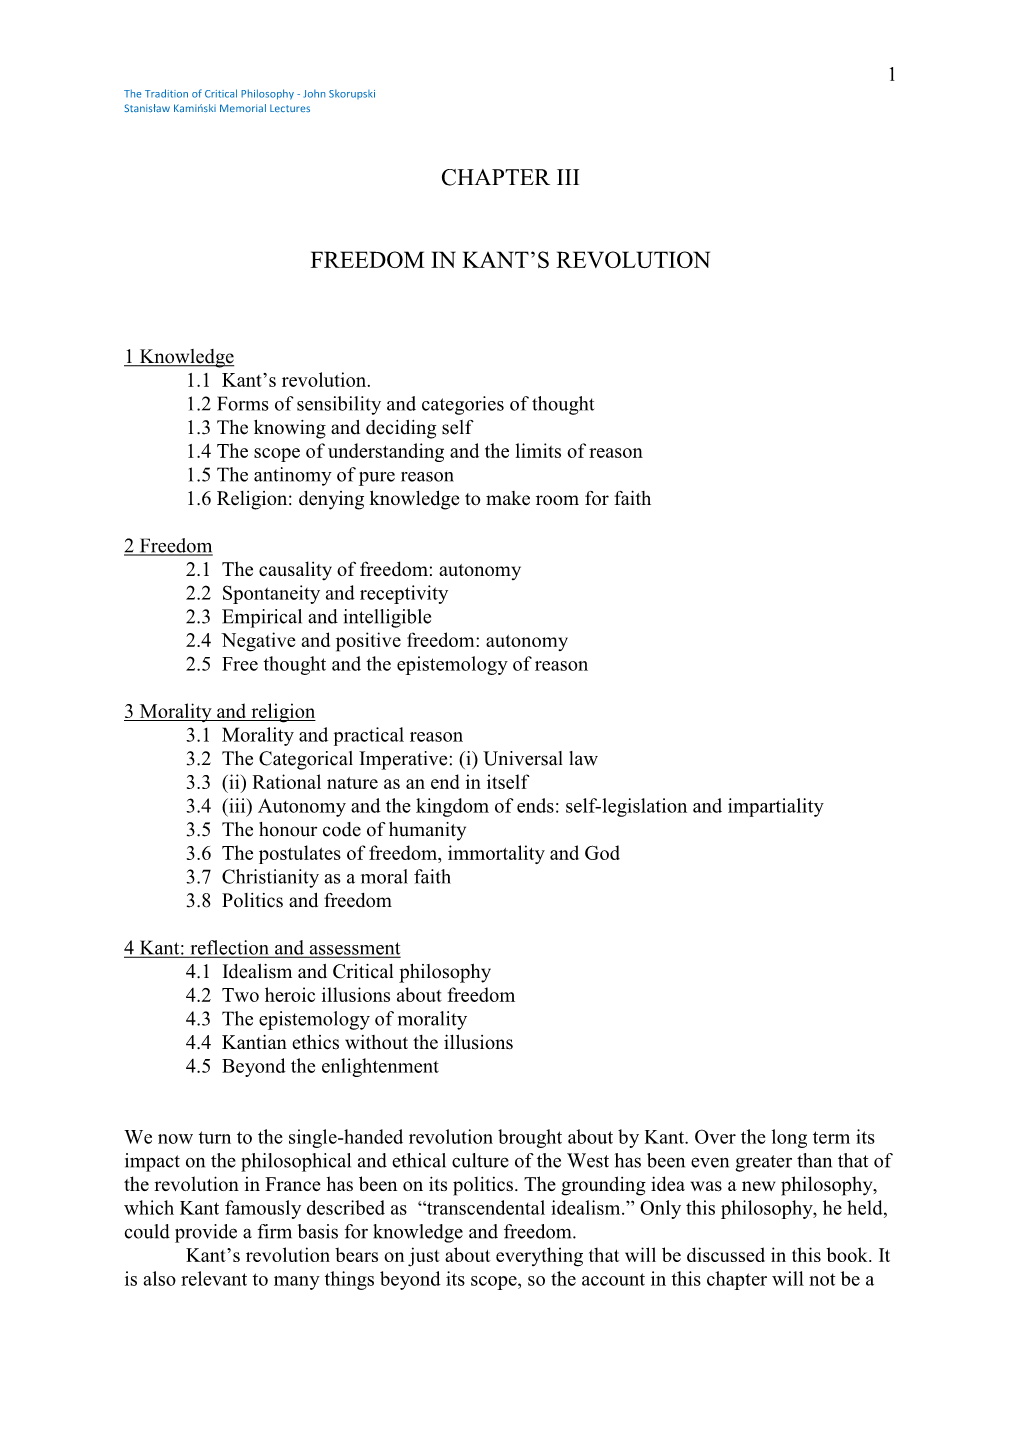 Chapter Iii Freedom in Kant's Revolution